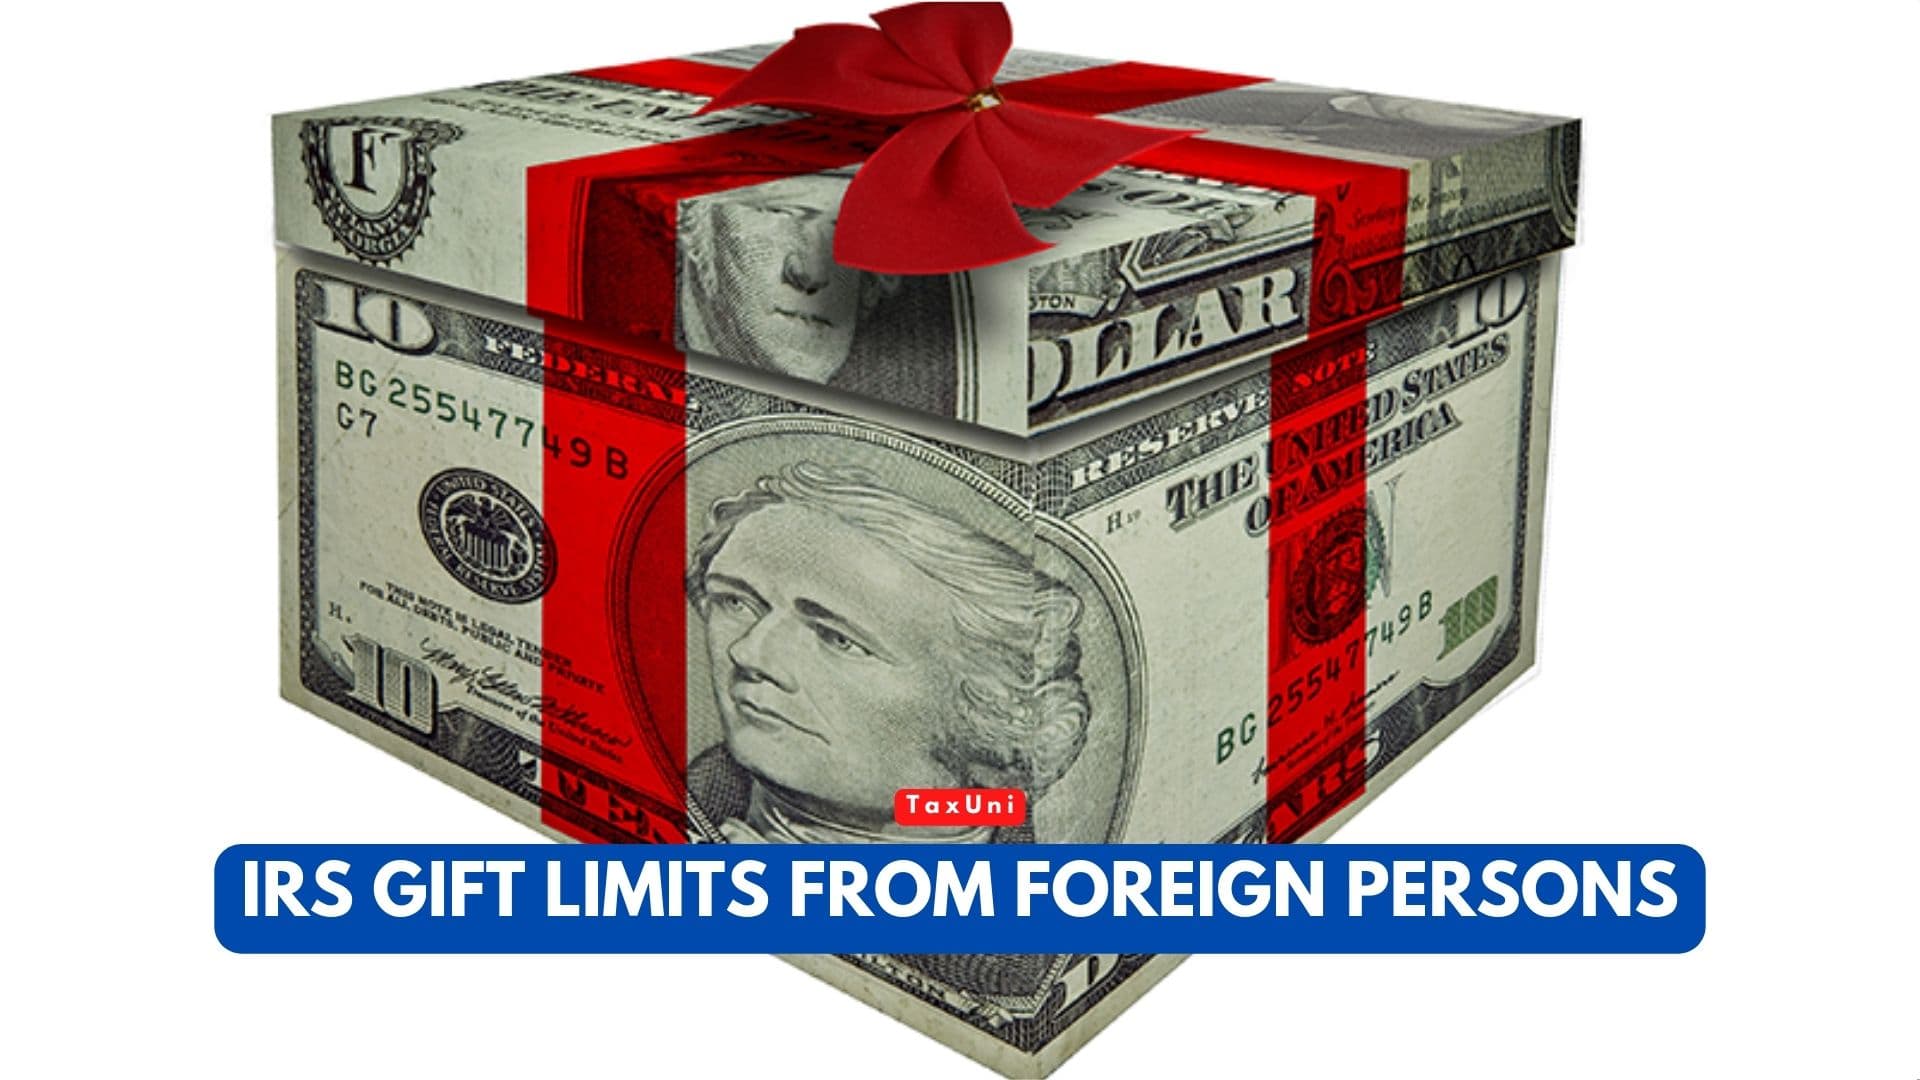 IRS Gift Limits From Foreign Persons